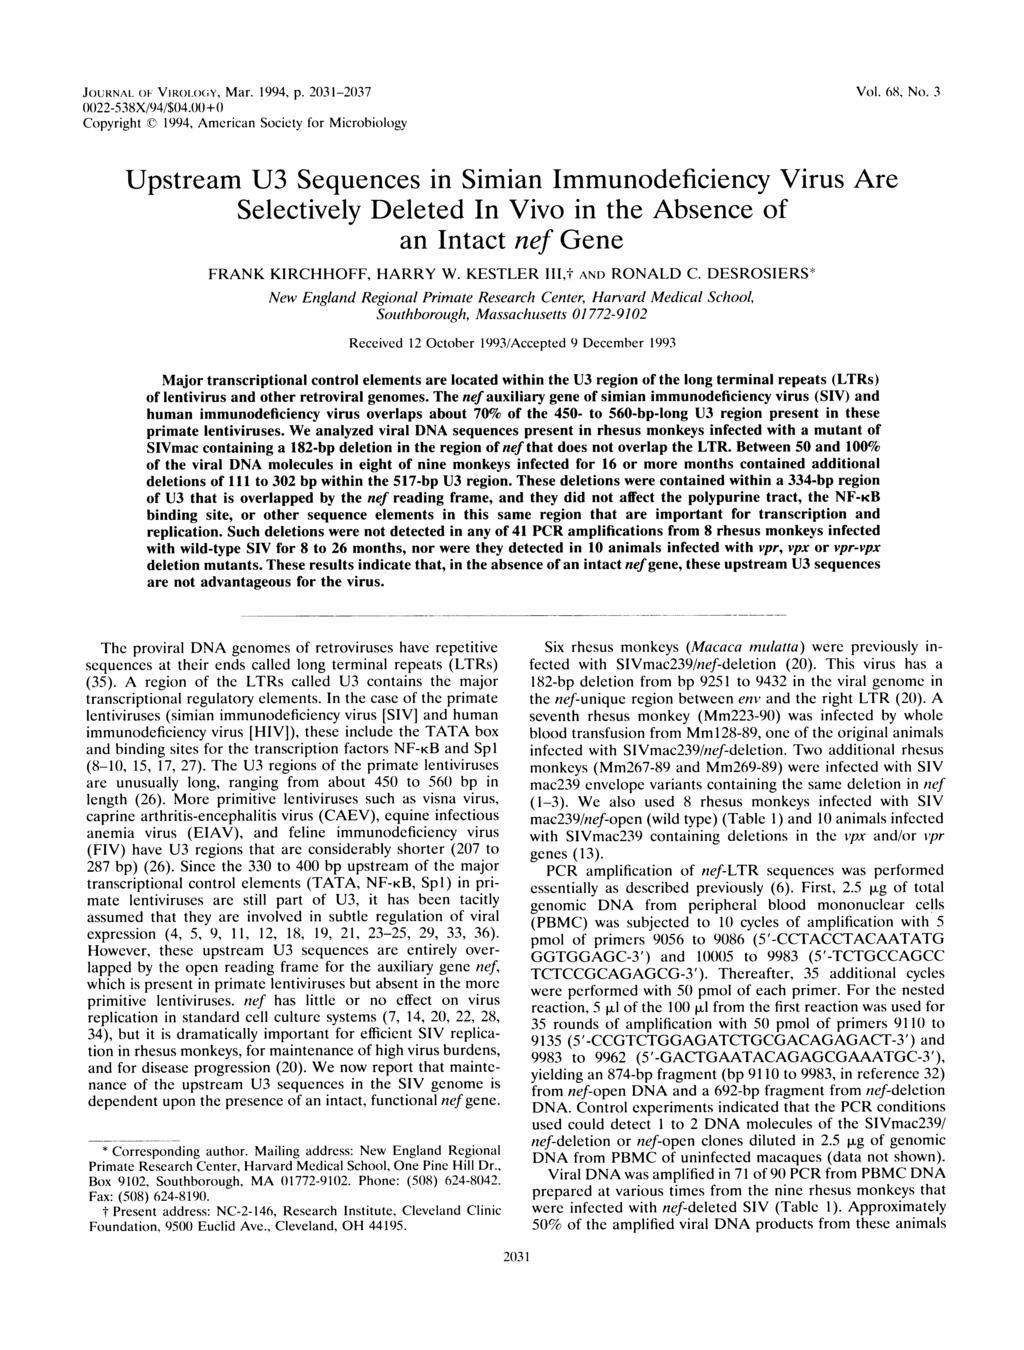 JOURNAL OF VIROLOGY, Mar. 1994, p. 2031-2037 0022-538X/94/$04.00+0 Copyright 1994, American Society for Microbiology Vol. 68, No.